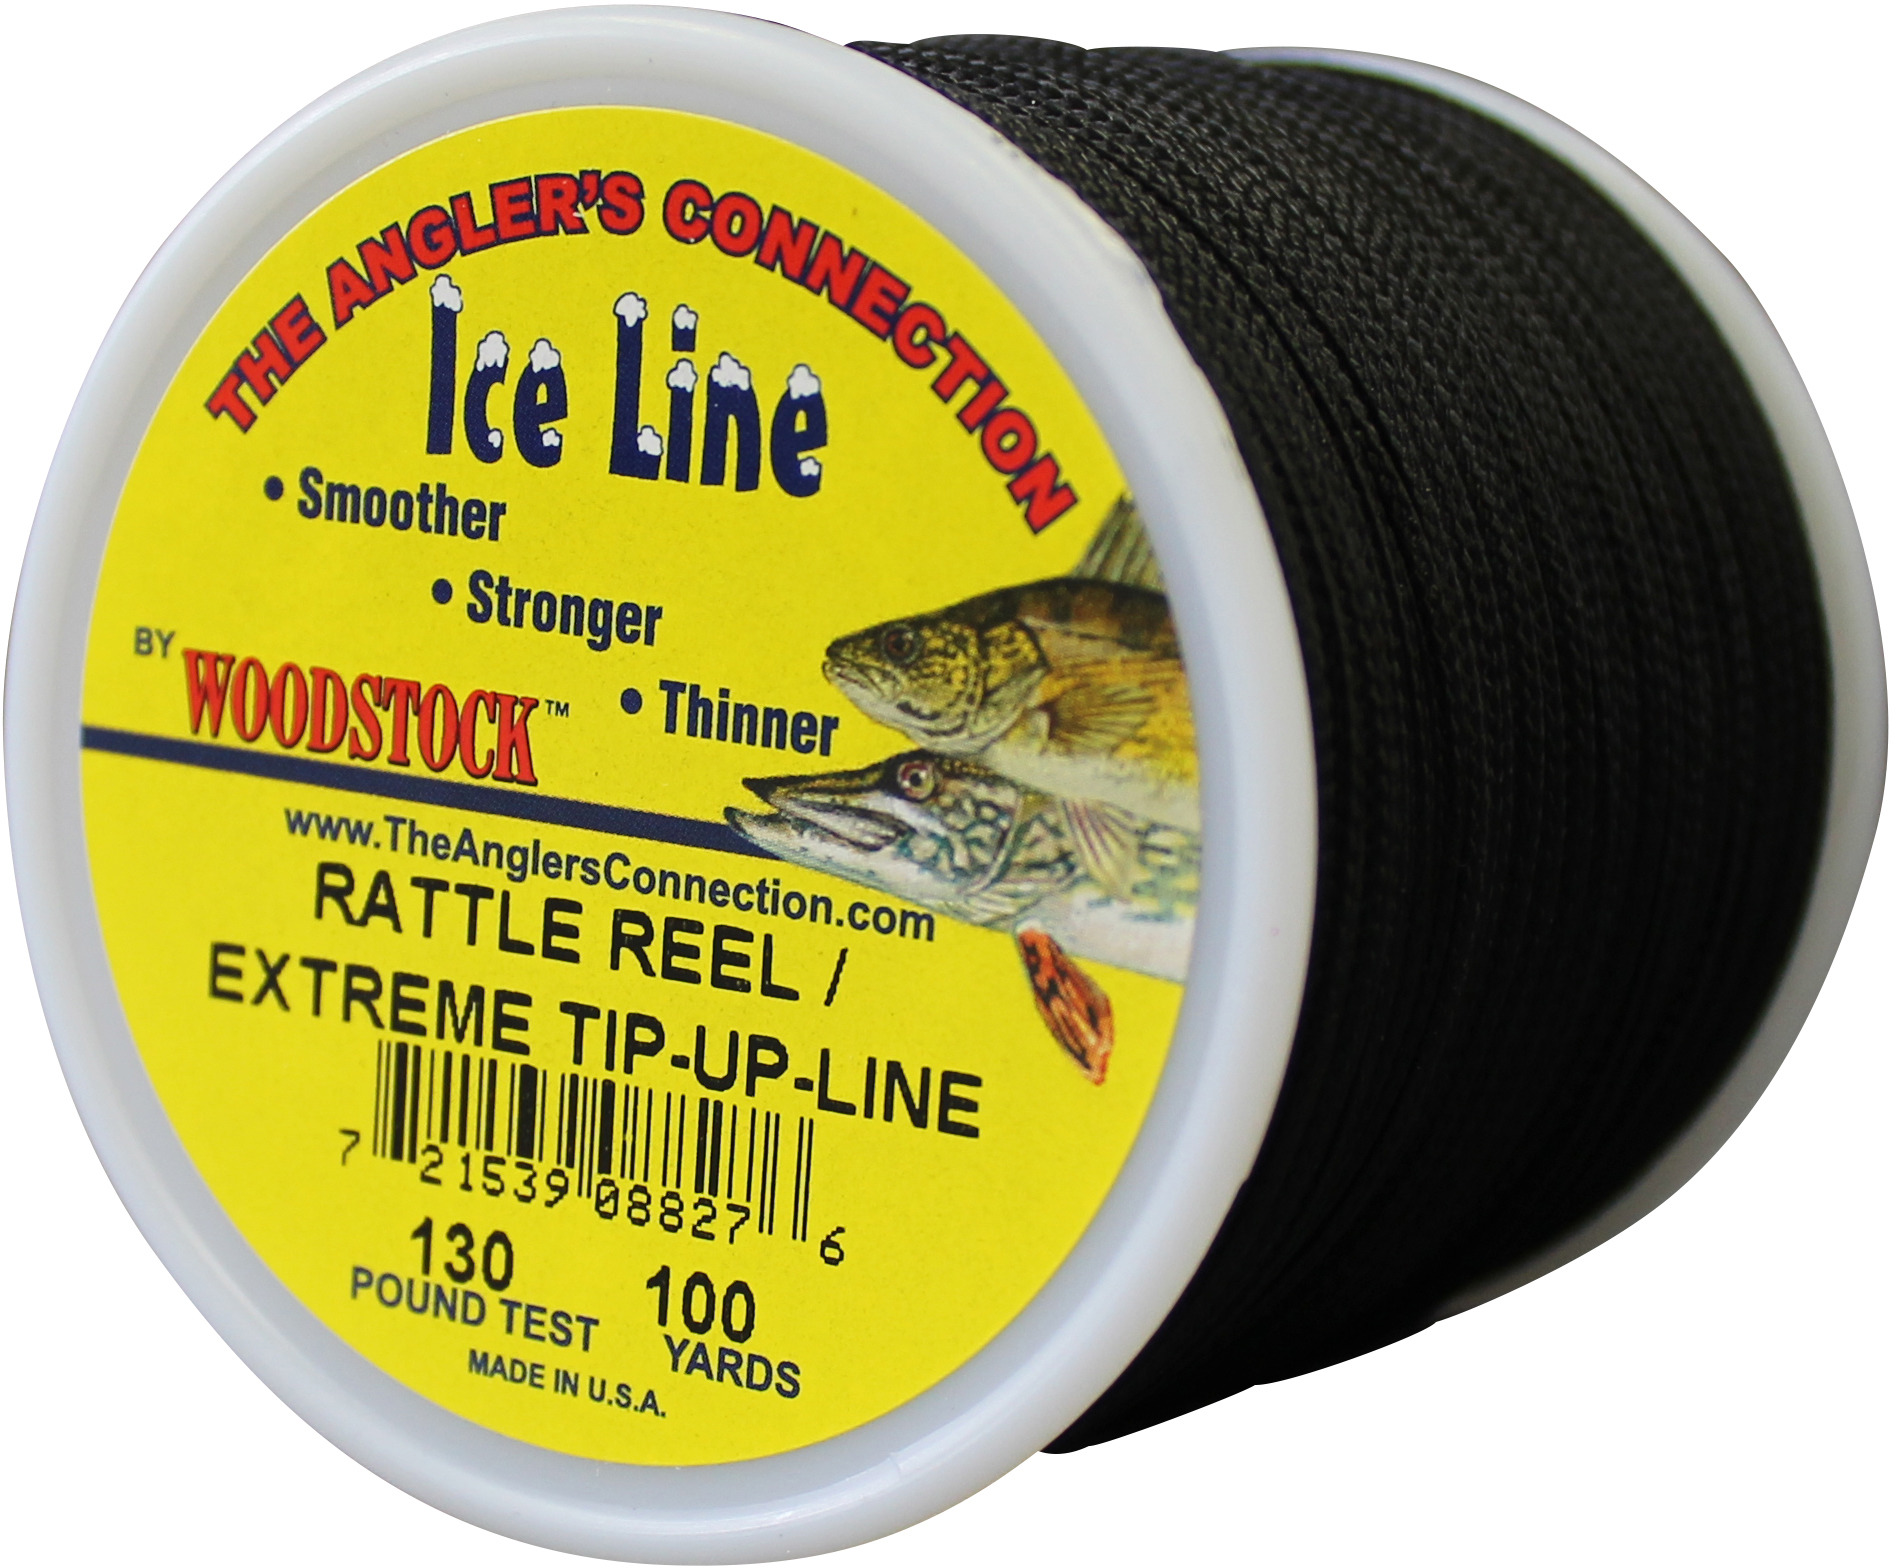 Woodstock Rattle Reel and Tip-up Line